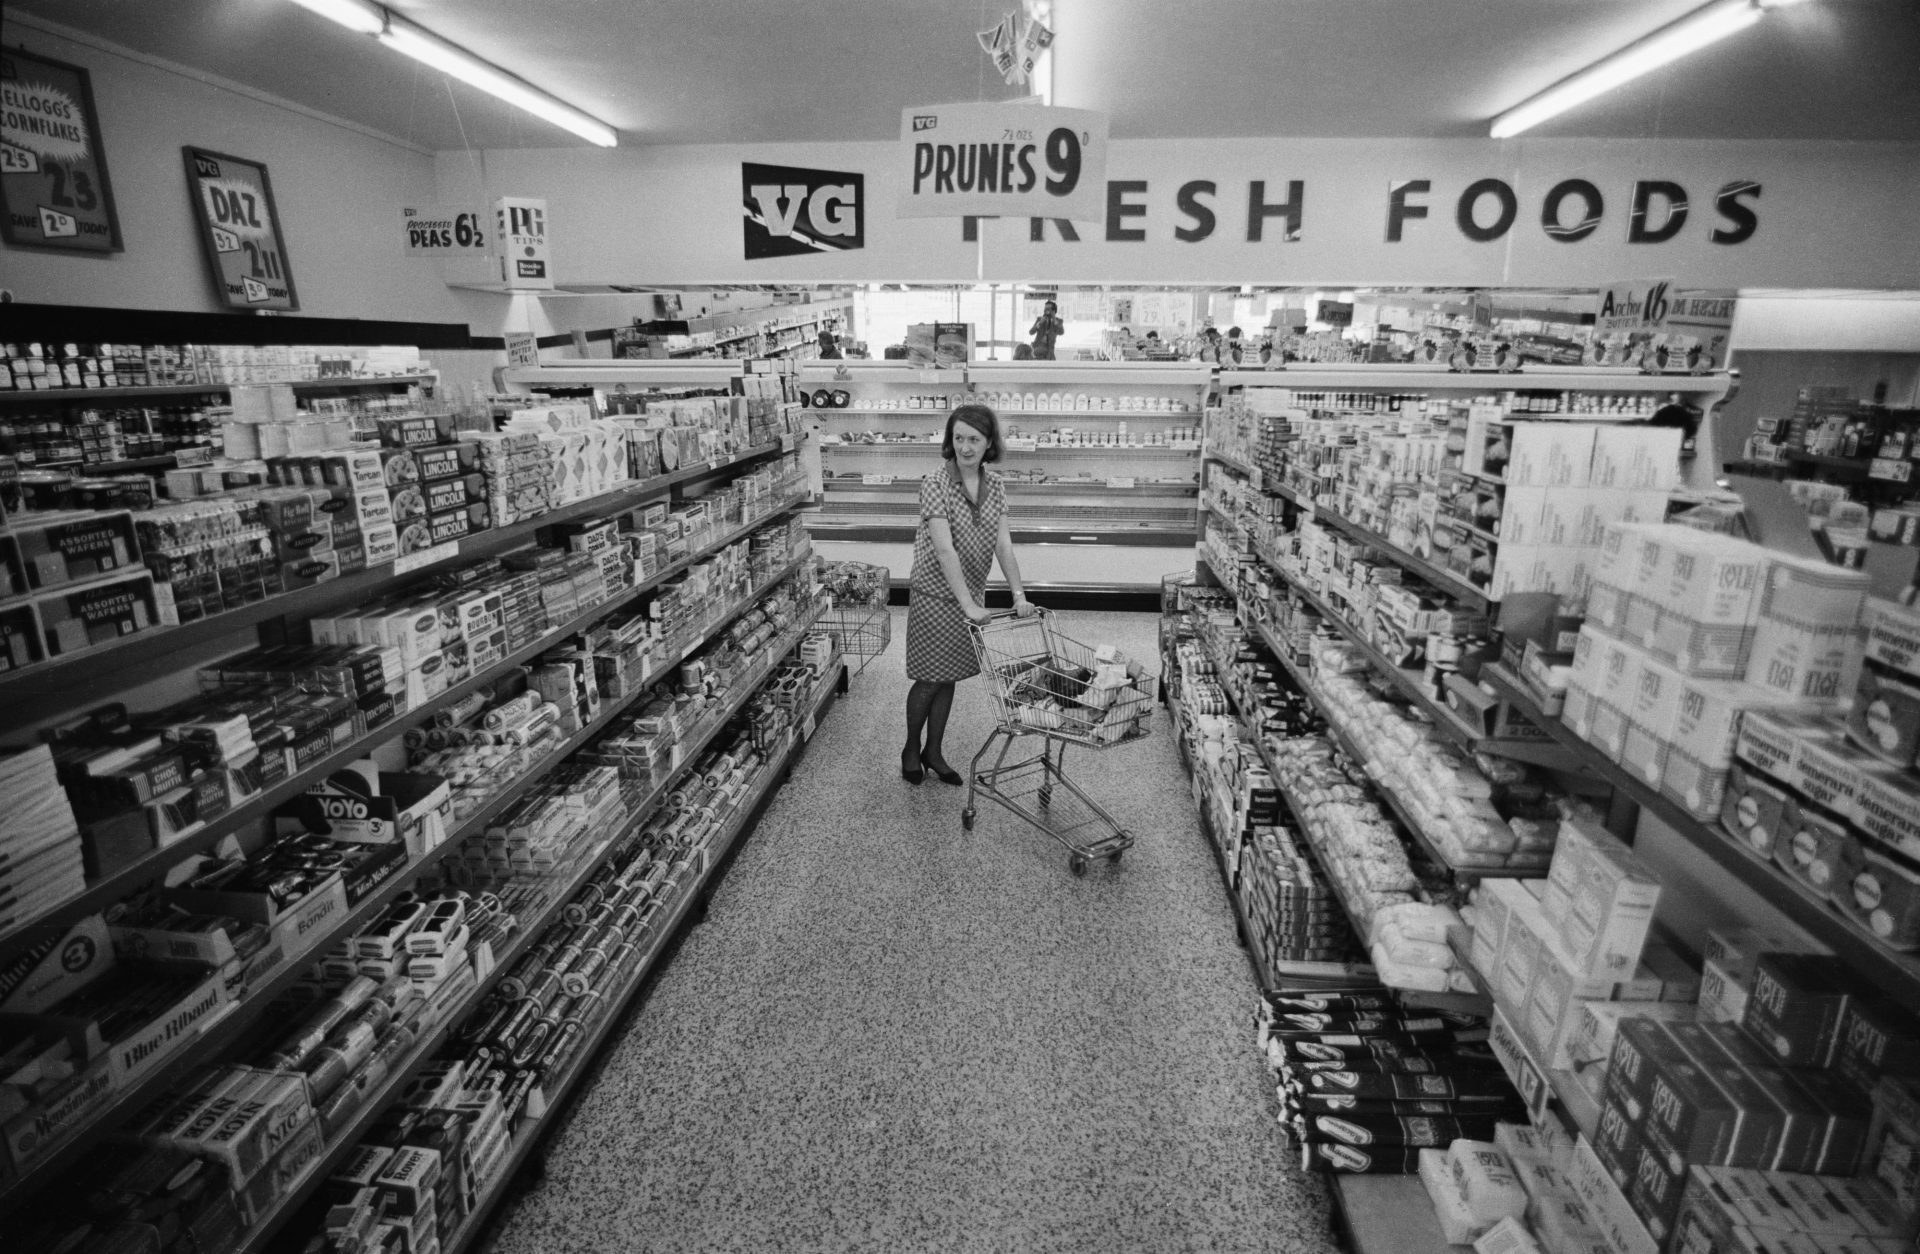 A woman shopper in a supermarket in 1968. Britain’s first fully self-service store had opened only 20 years earlier. Photo: William Lovelace/Daily Express/Getty Images